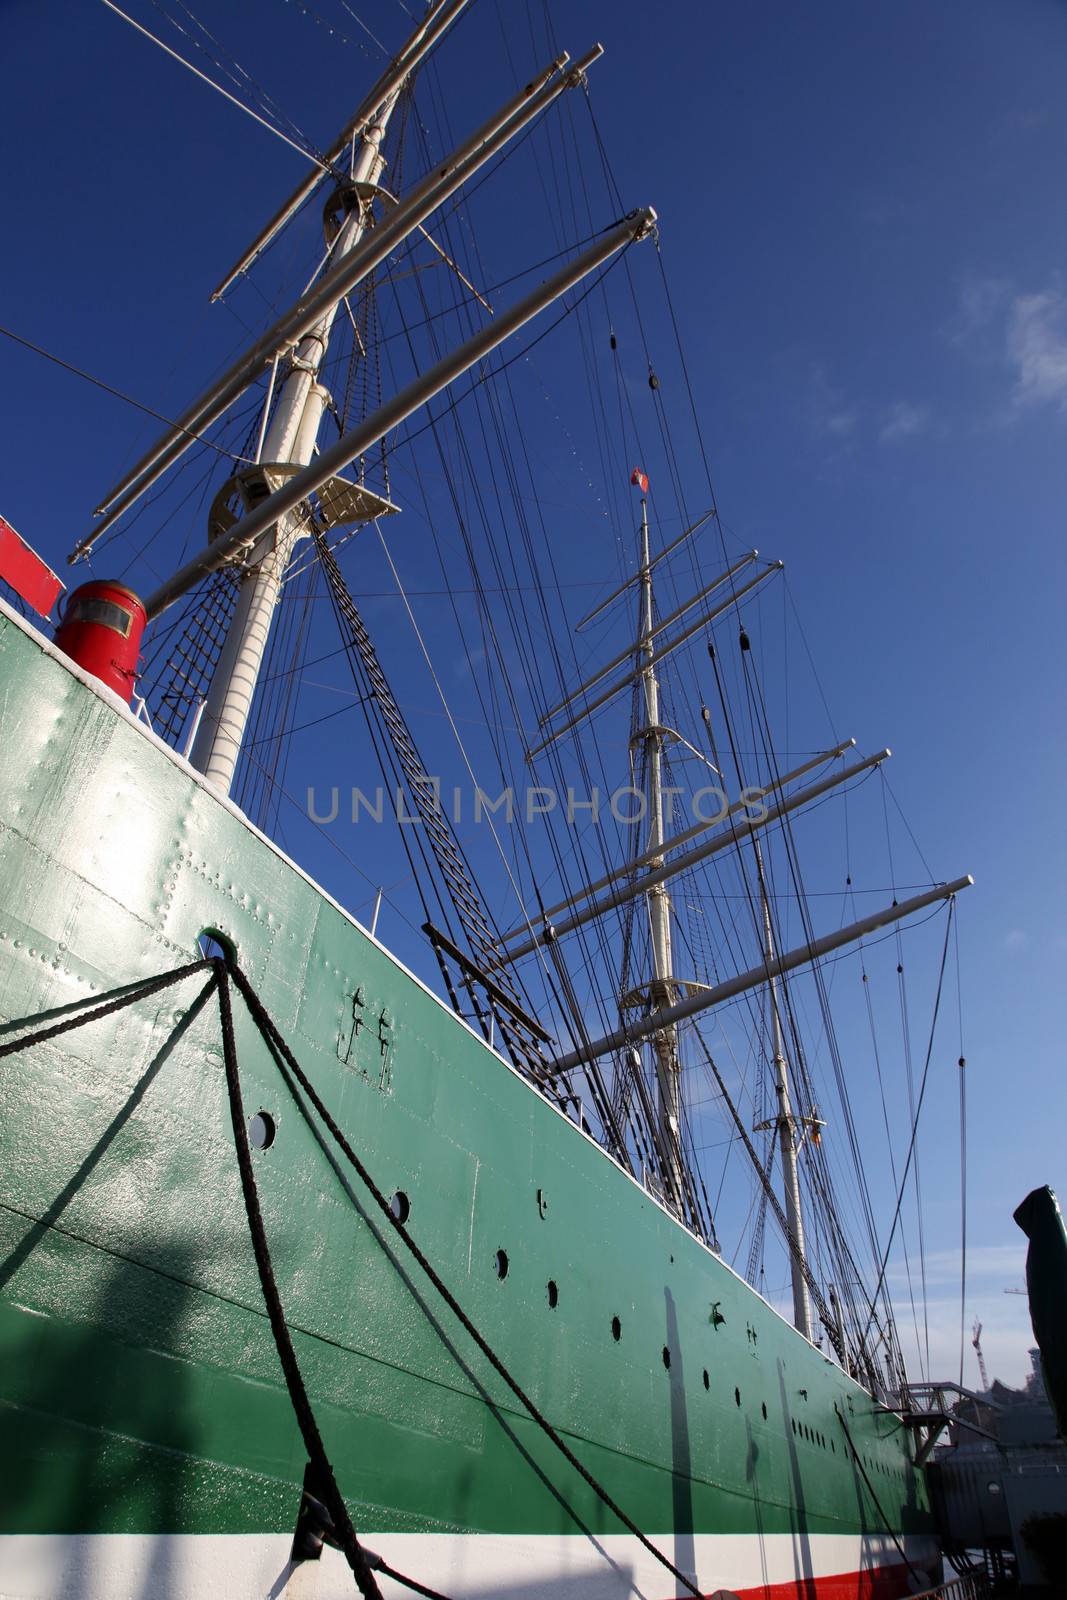 View along the hull of a tall ship in harbour looking up towards the twin masts and rigging